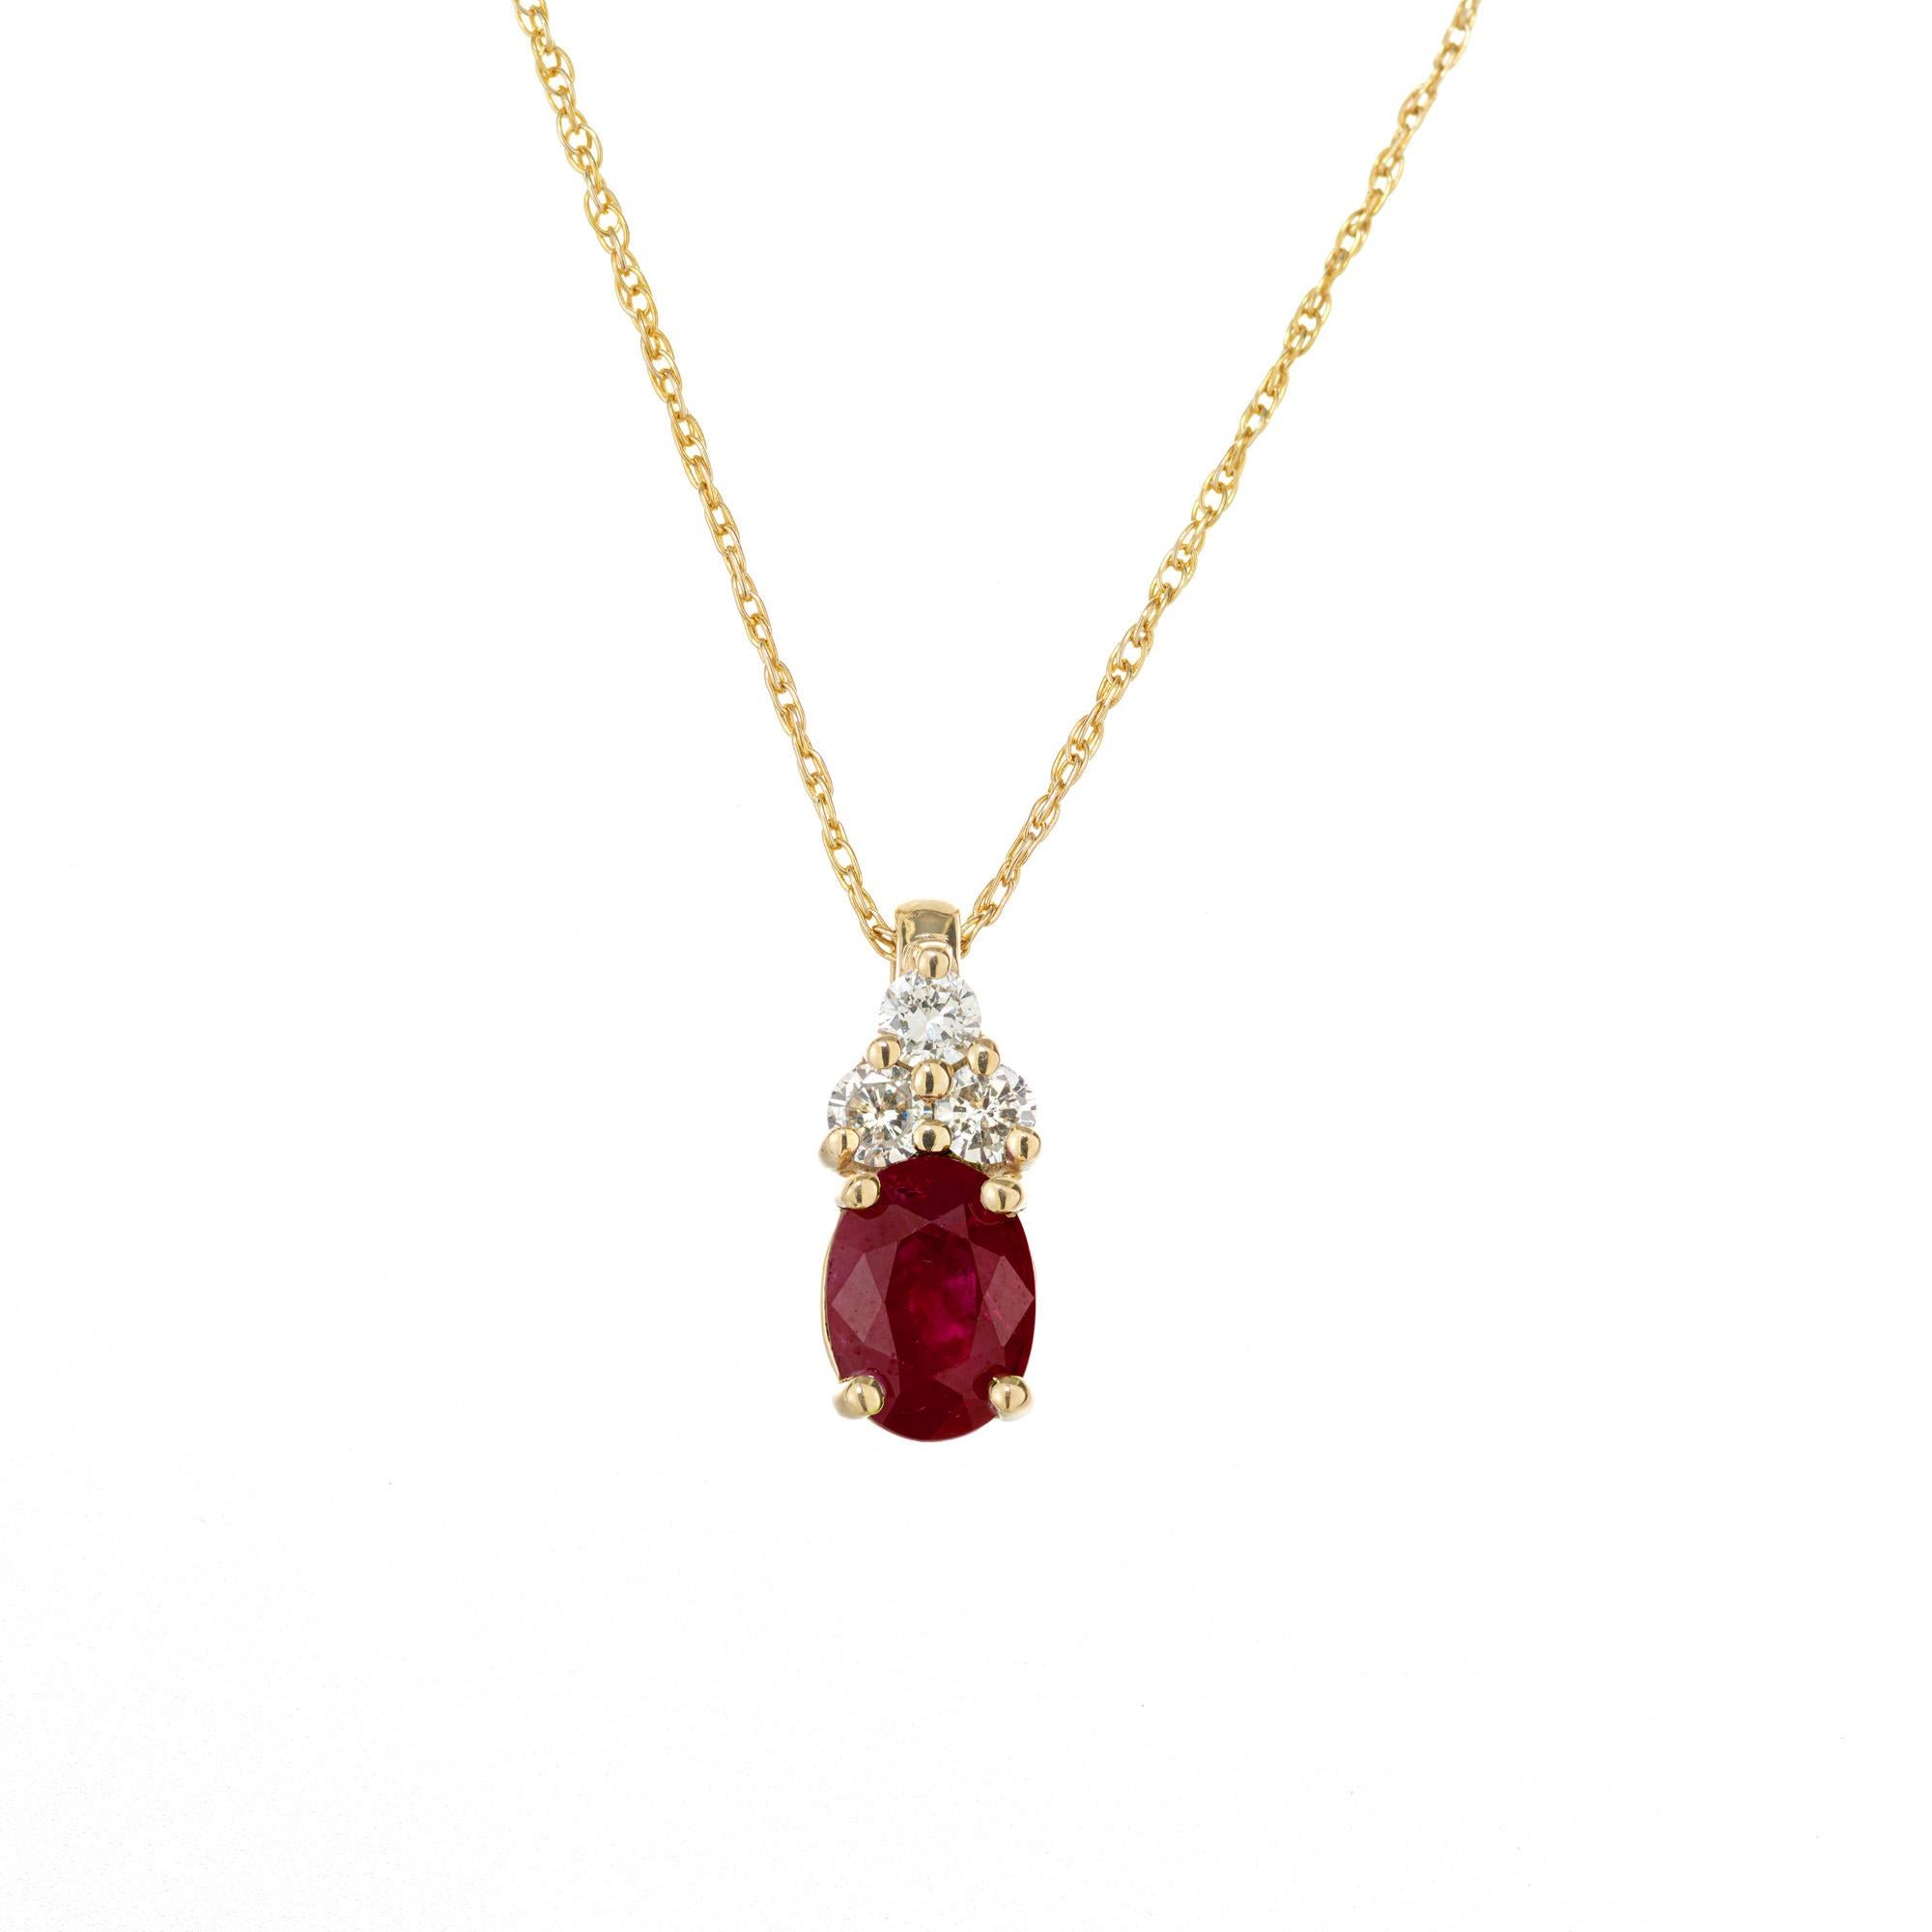 Ruby and diamond pendant necklace. GIA certified, Burma ( Myanmar) oval ruby 1.14 carat, set in a 14k yellow gold setting with 3 round brilliant cut diamond accents. Heated- moderate residue. 17 inch 14k yellow gold chain. 

1 oval red ruby approx.